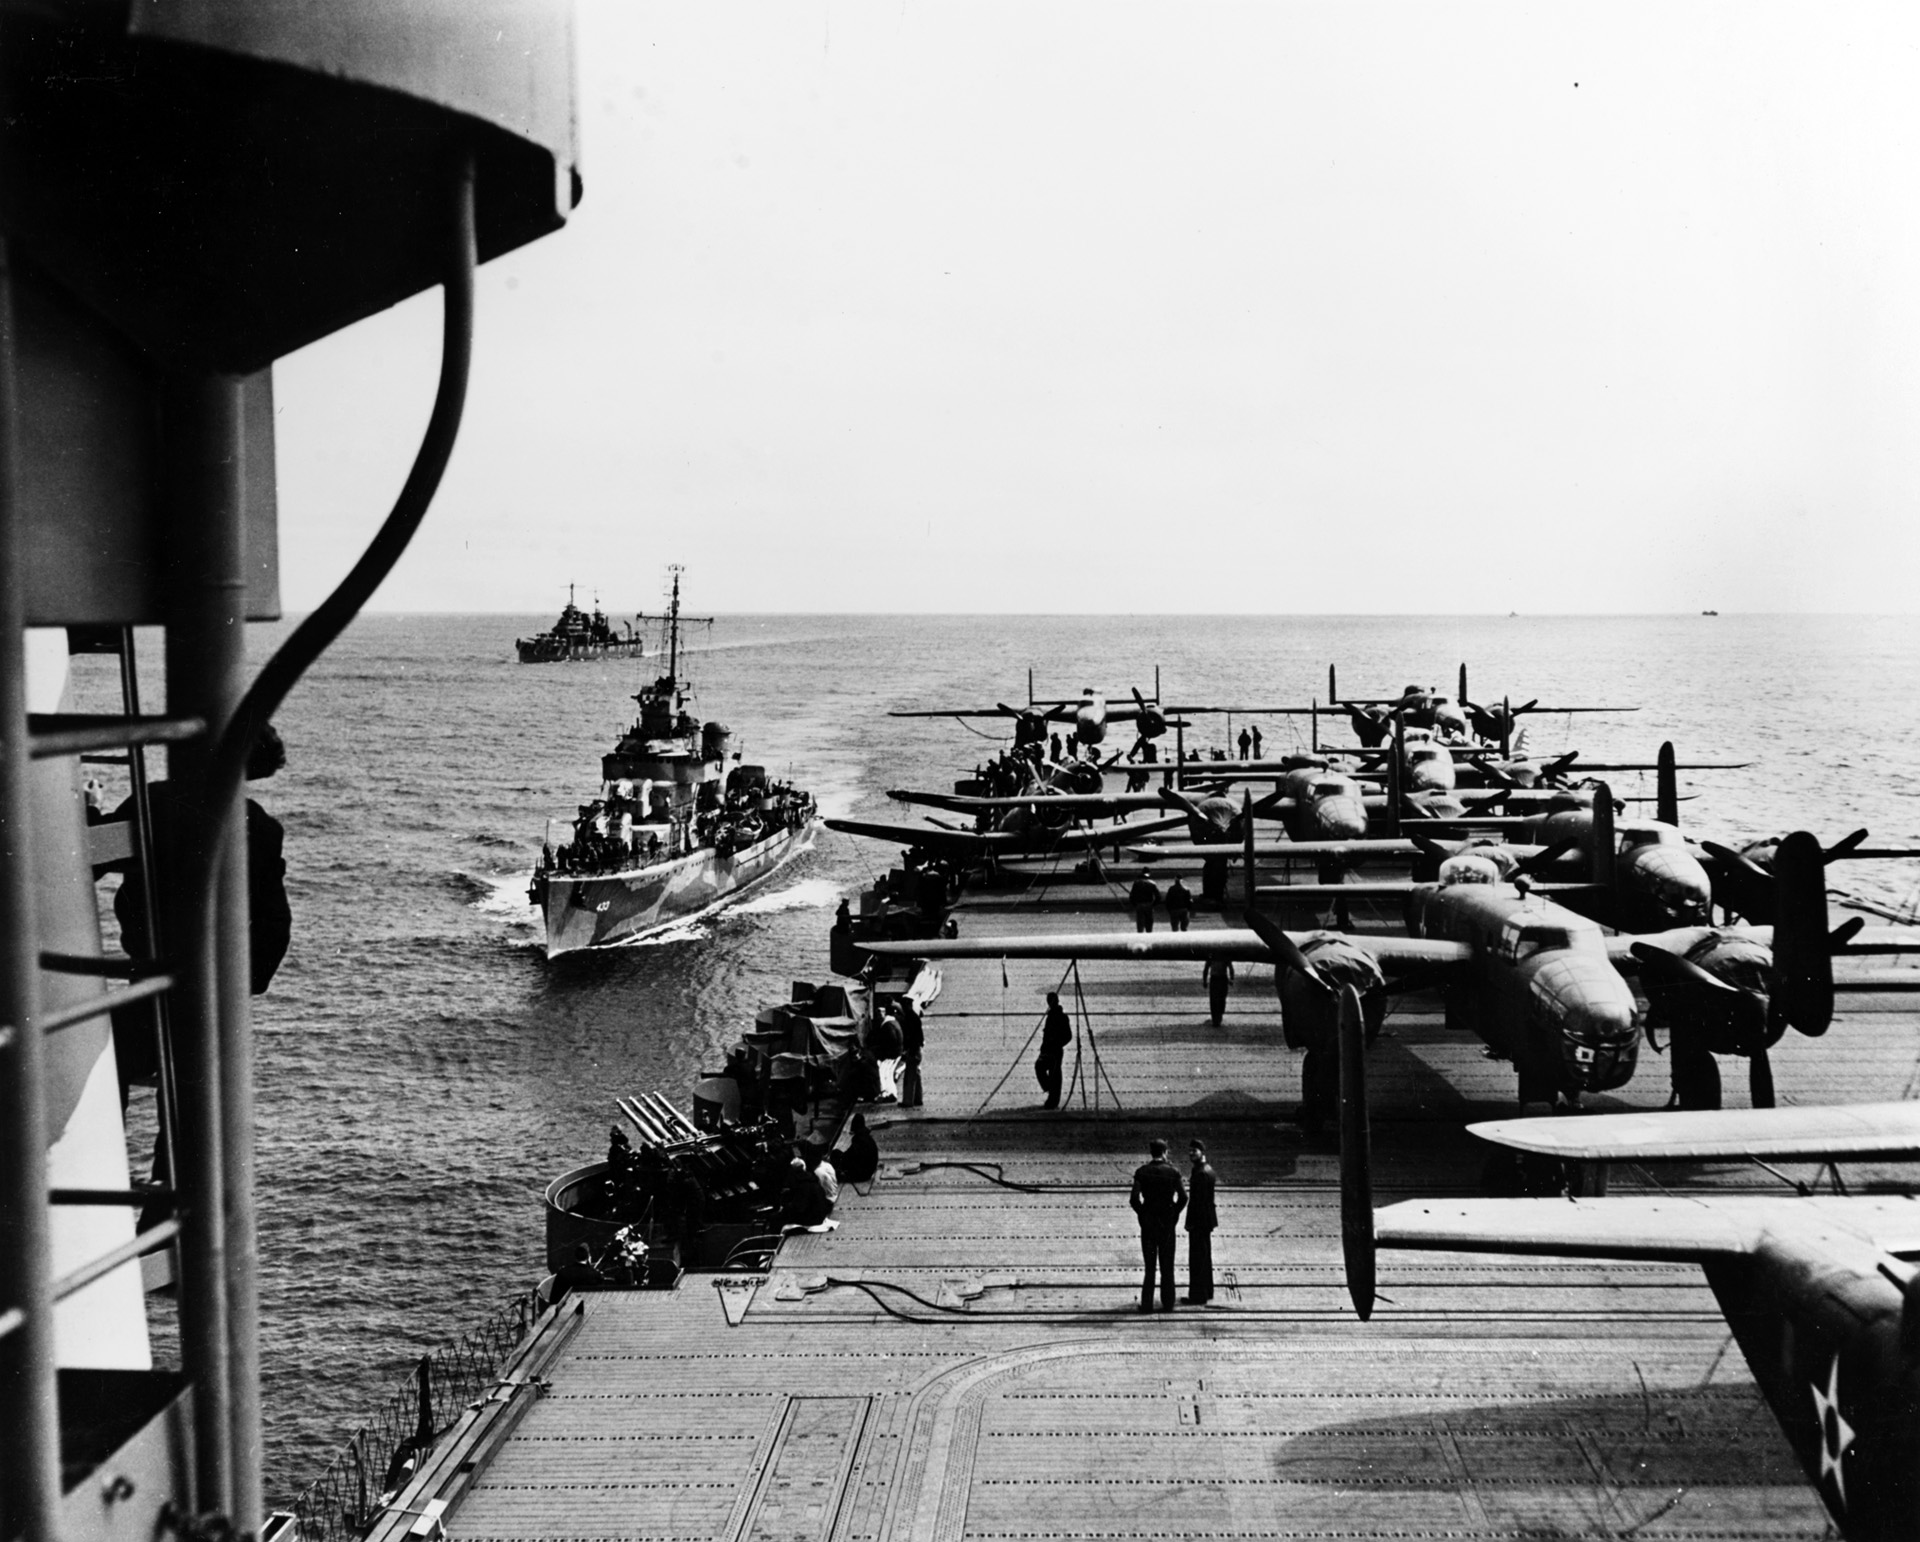 Gwin, left, escorts the American carrier USS Hornet en route to launch the Doolittle Raiders attack on Tokyo, April 1942.